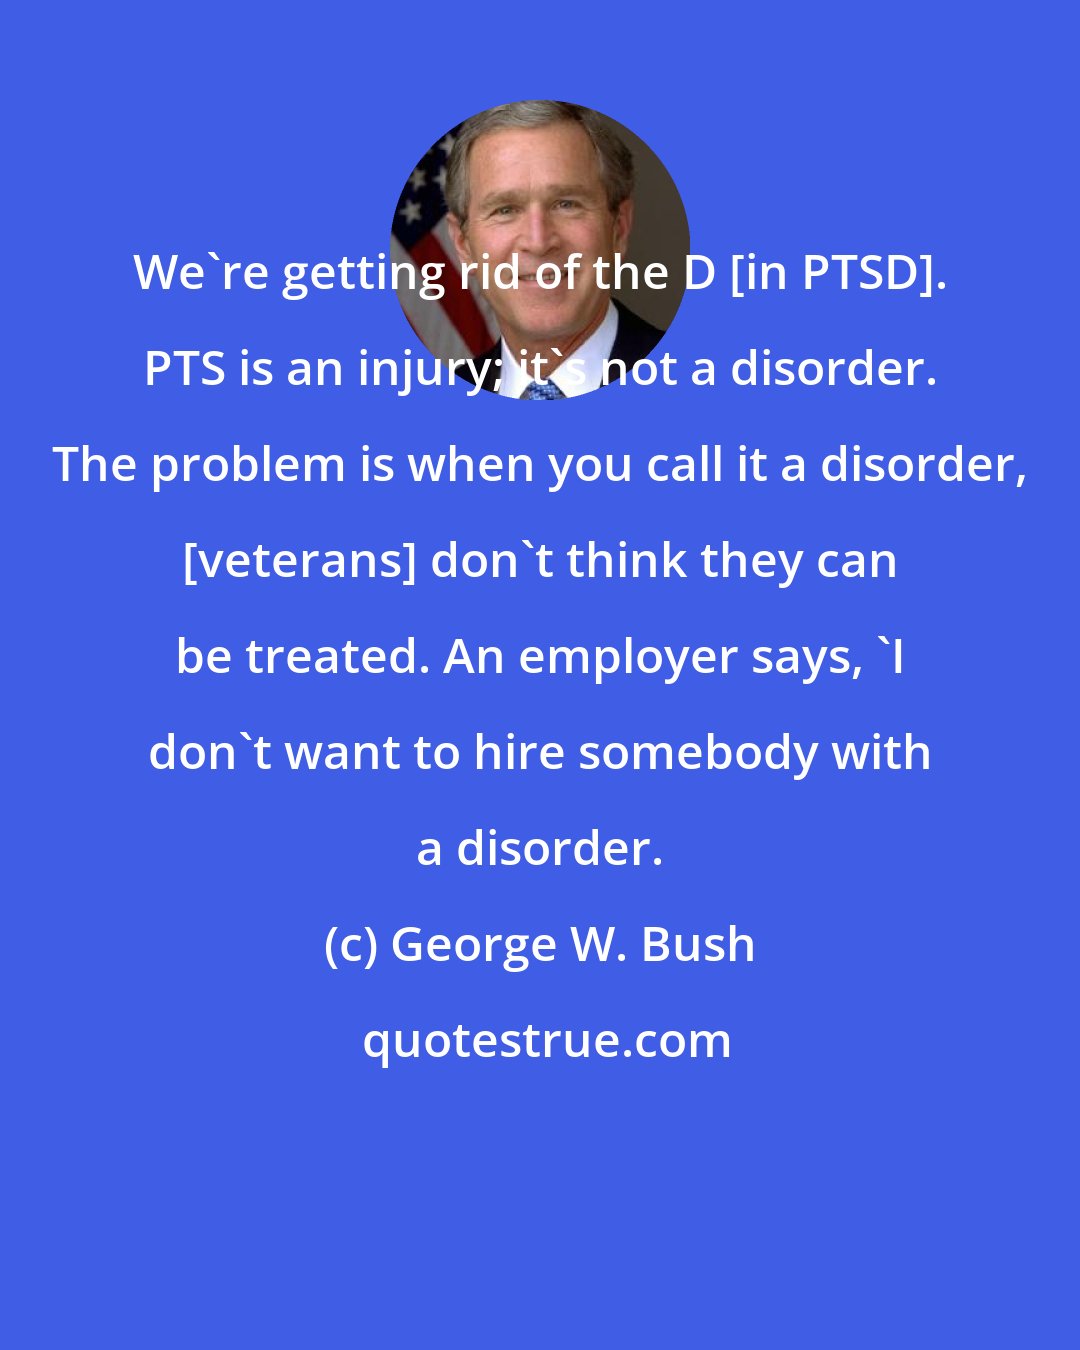 George W. Bush: We're getting rid of the D [in PTSD]. PTS is an injury; it's not a disorder. The problem is when you call it a disorder, [veterans] don't think they can be treated. An employer says, 'I don't want to hire somebody with a disorder.